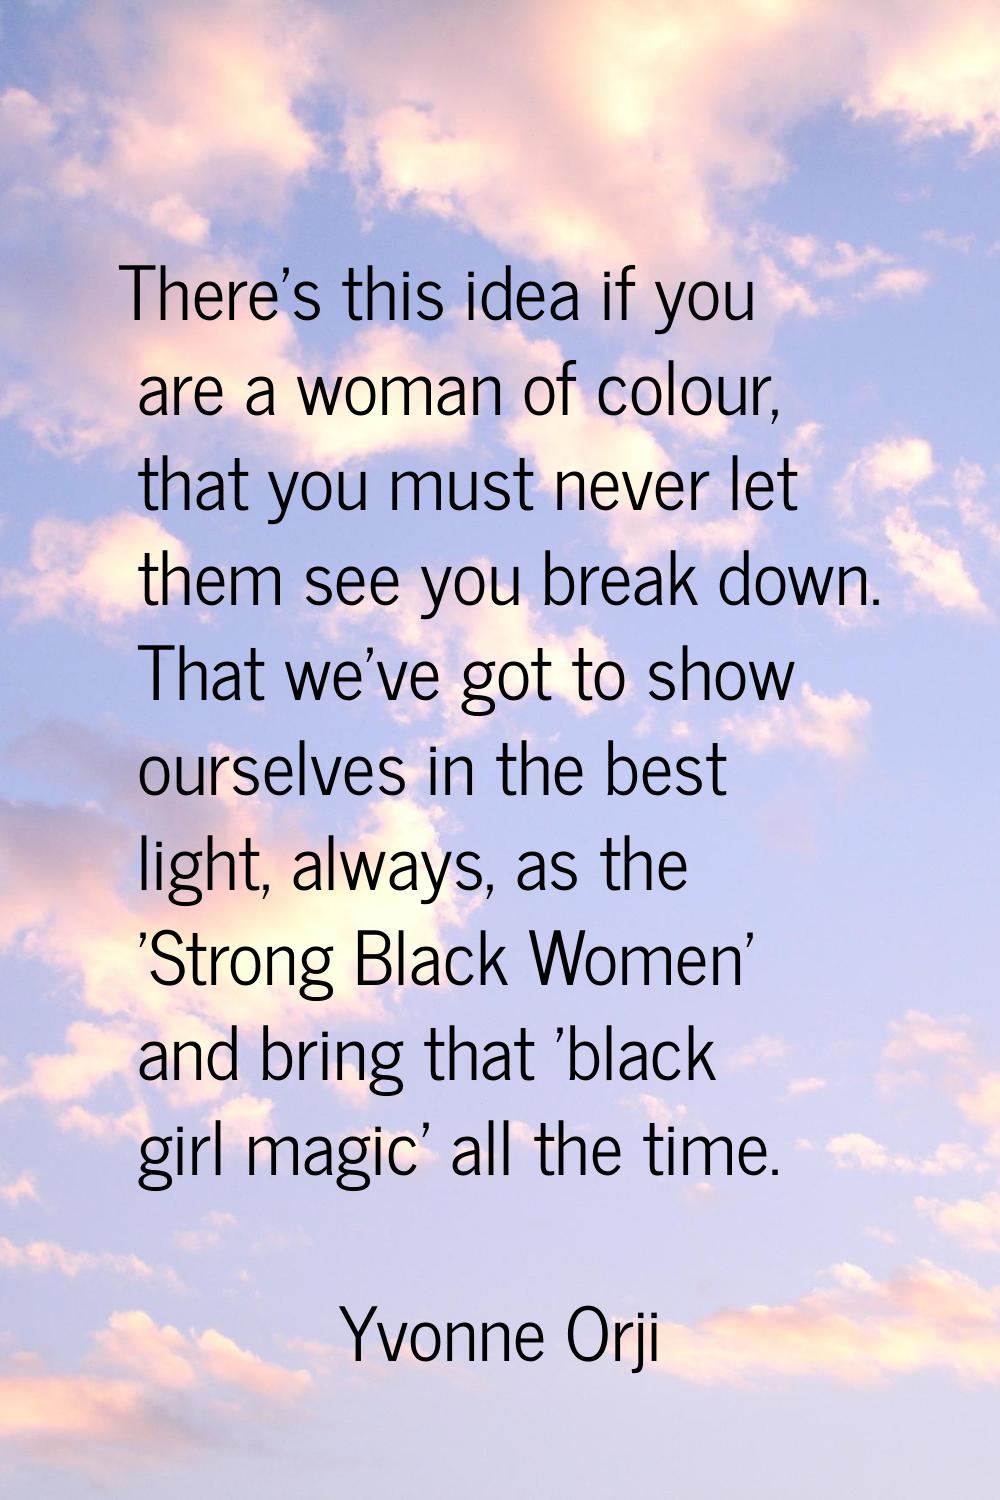 There's this idea if you are a woman of colour, that you must never let them see you break down. Th